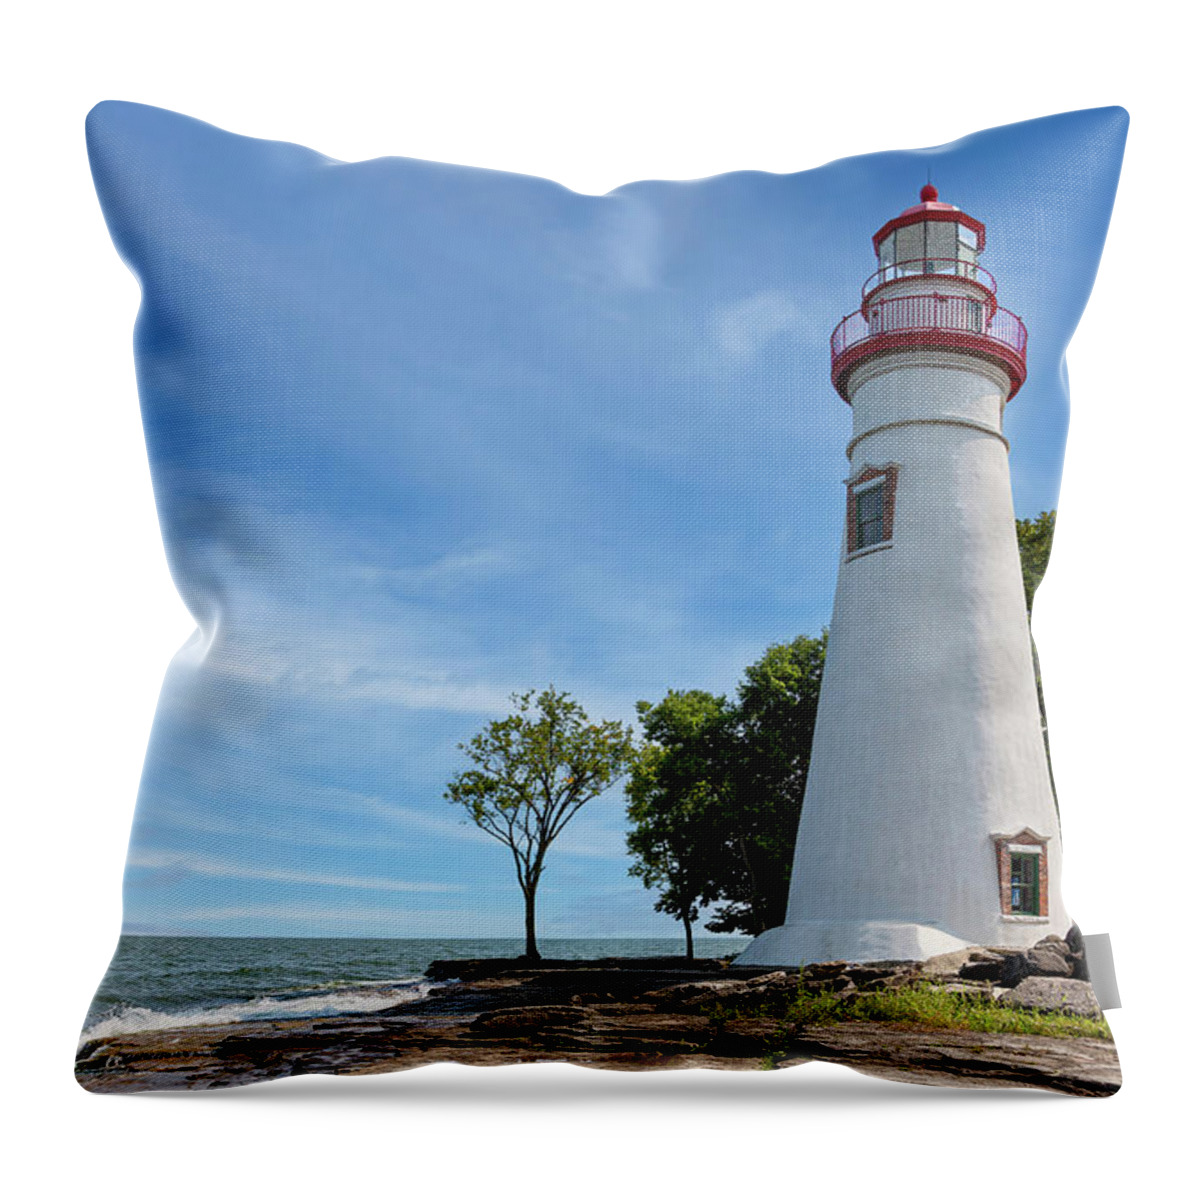 View Marblehead Lighthouse Throw Pillow featuring the photograph A View At Marblehead Lighthouse by Dale Kincaid